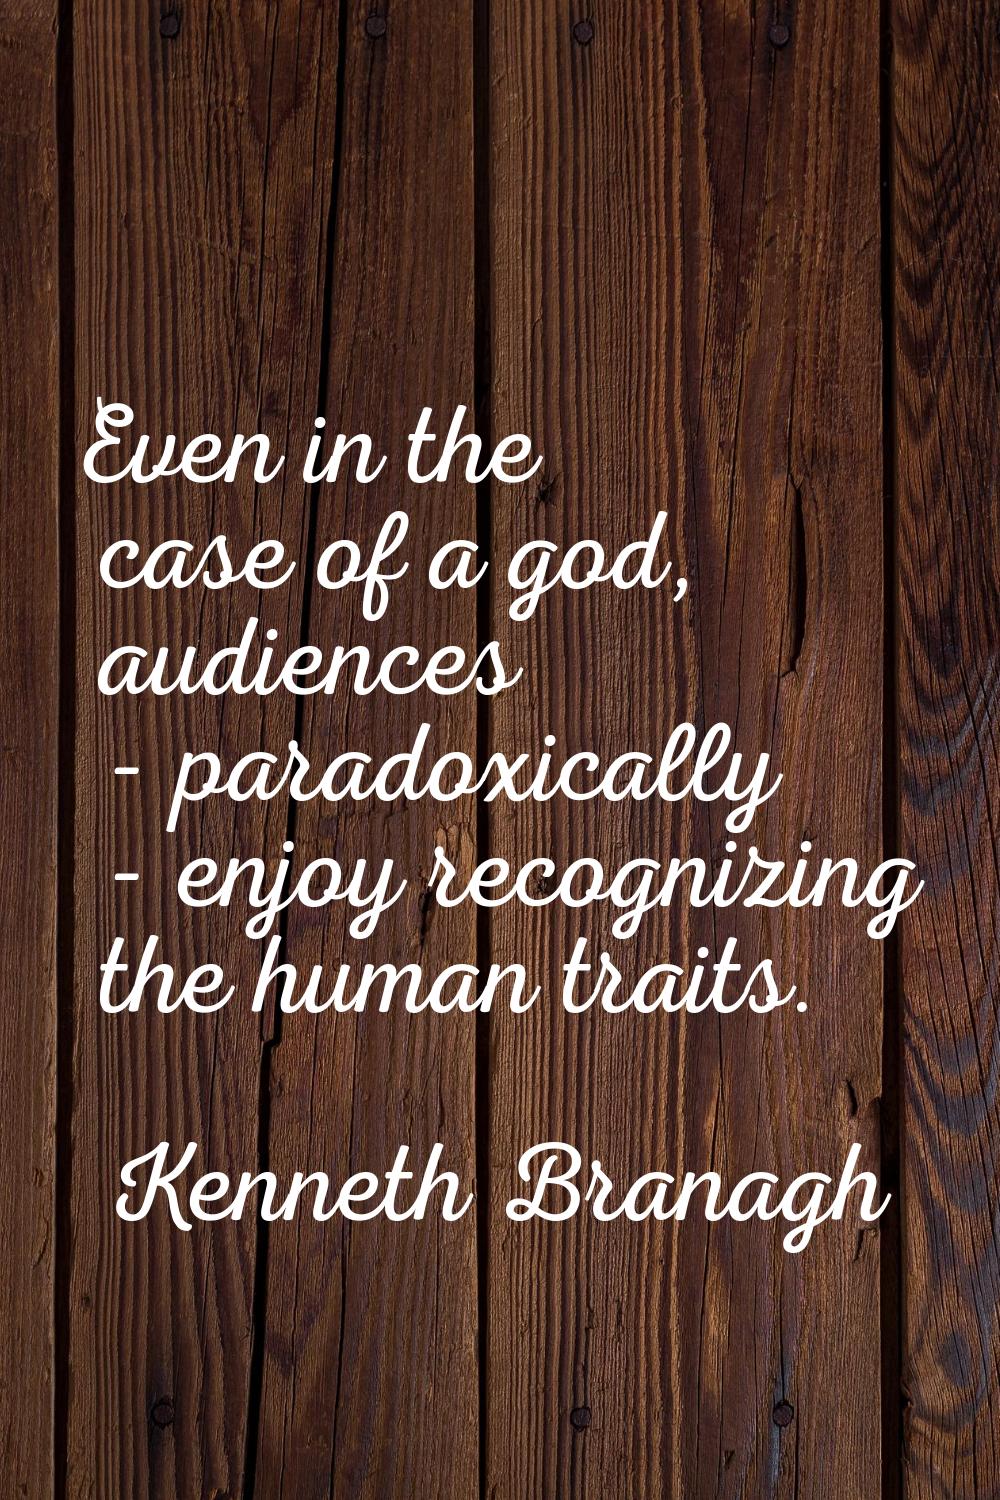 Even in the case of a god, audiences - paradoxically - enjoy recognizing the human traits.